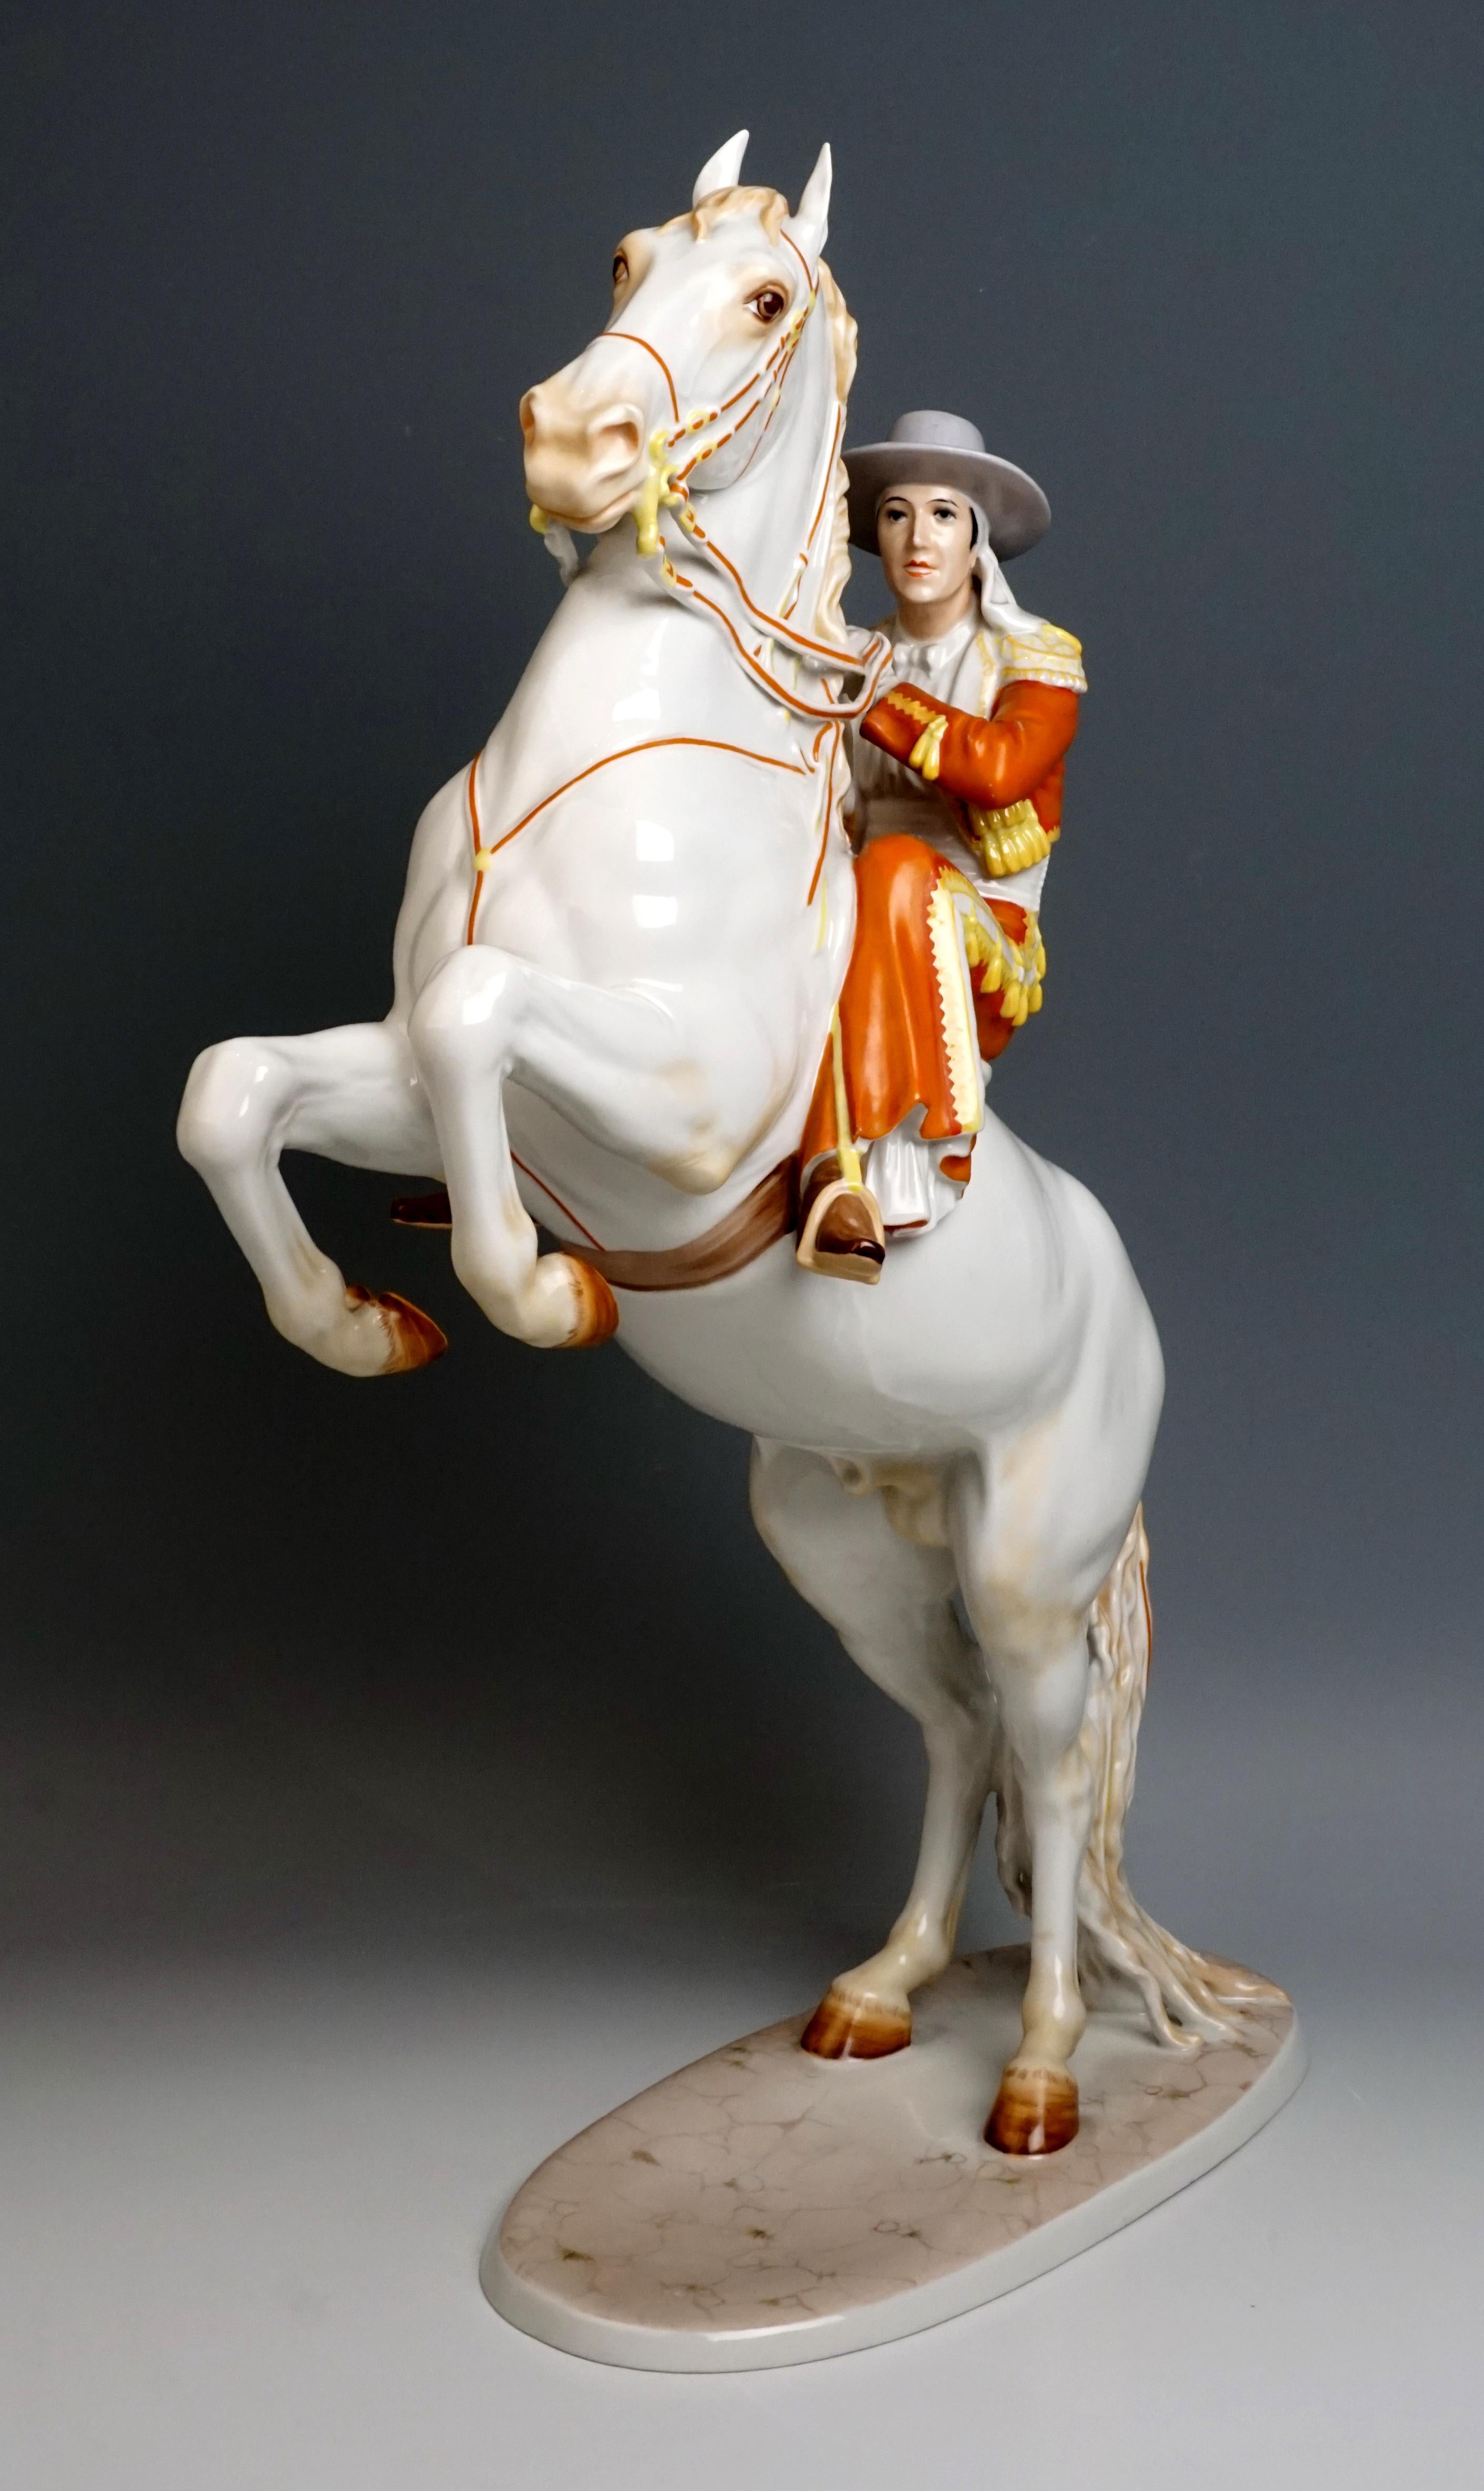 Very rare unrecorded Rosenthal Figure

Manufactory: Selb - Art Department / Bavaria / Rosenthal Germany 
Dating: manufactured 1943-1952 
Material and technique: porcelain / chinaware / painted / glazed

Design by Hugo Meisel (1887-1966), circa